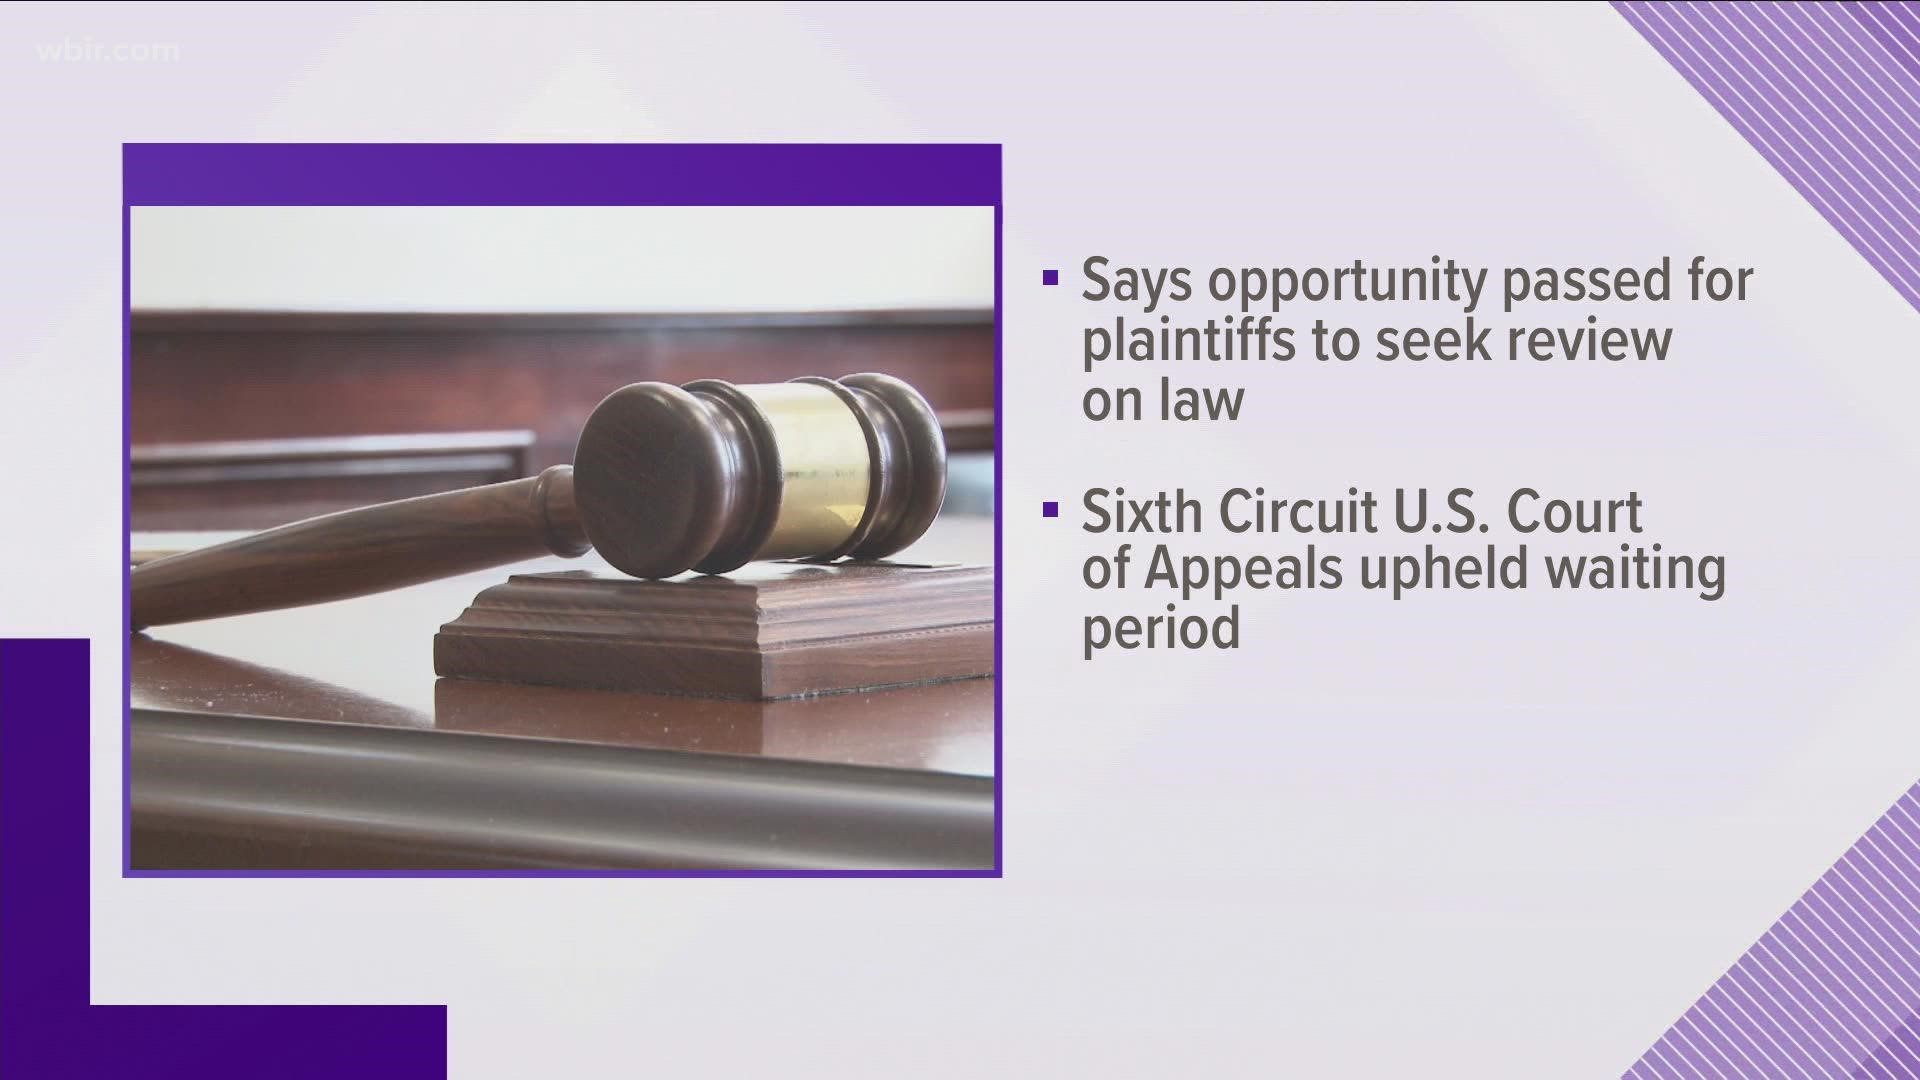 According to Slatery, the chance for plaintiffs to seek further review from the U.S. Supreme Court is over.